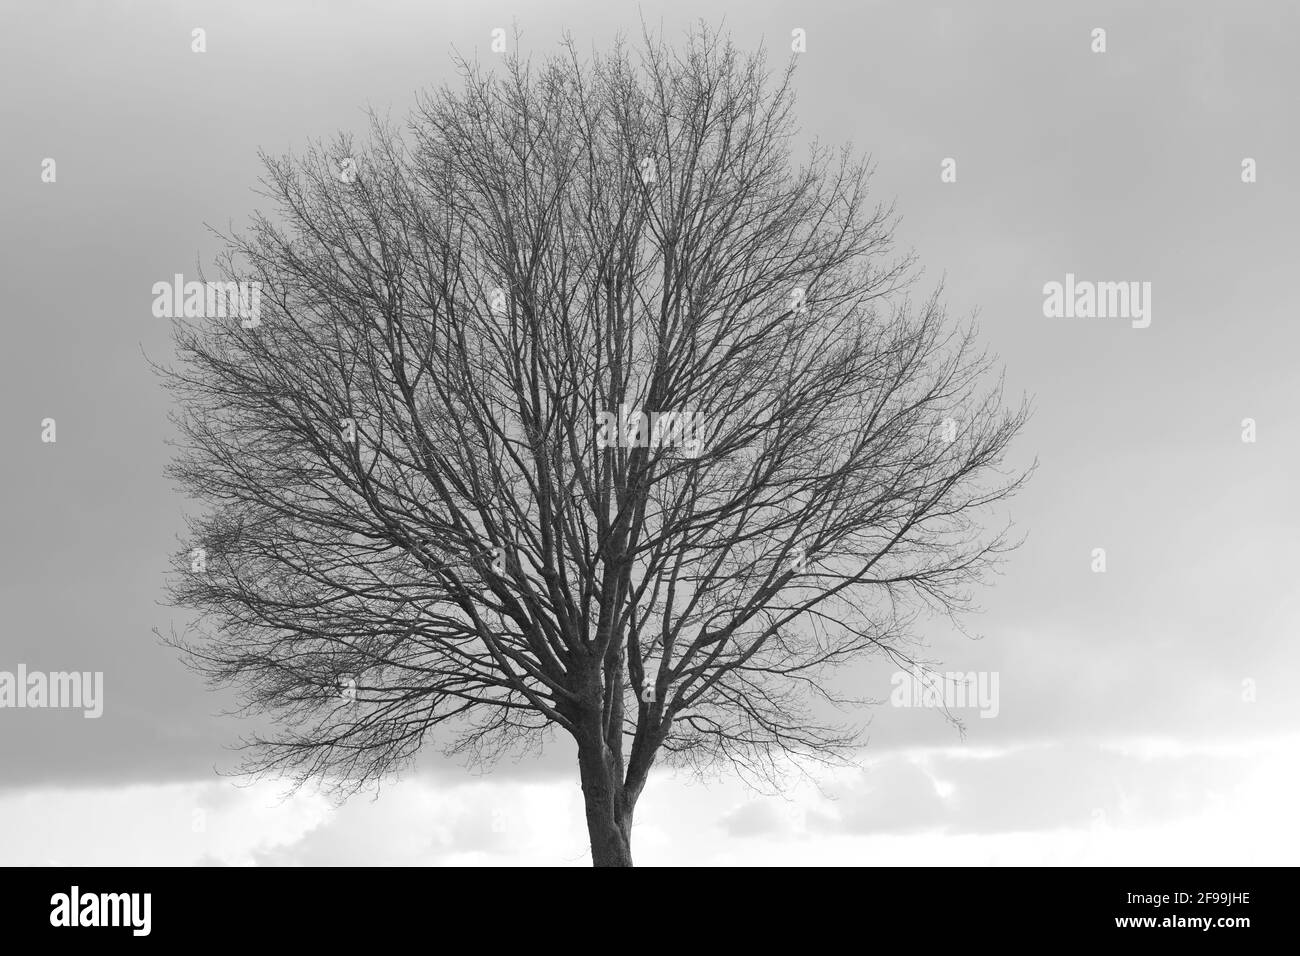 Treetop without leaves against a grey sky Stock Photo